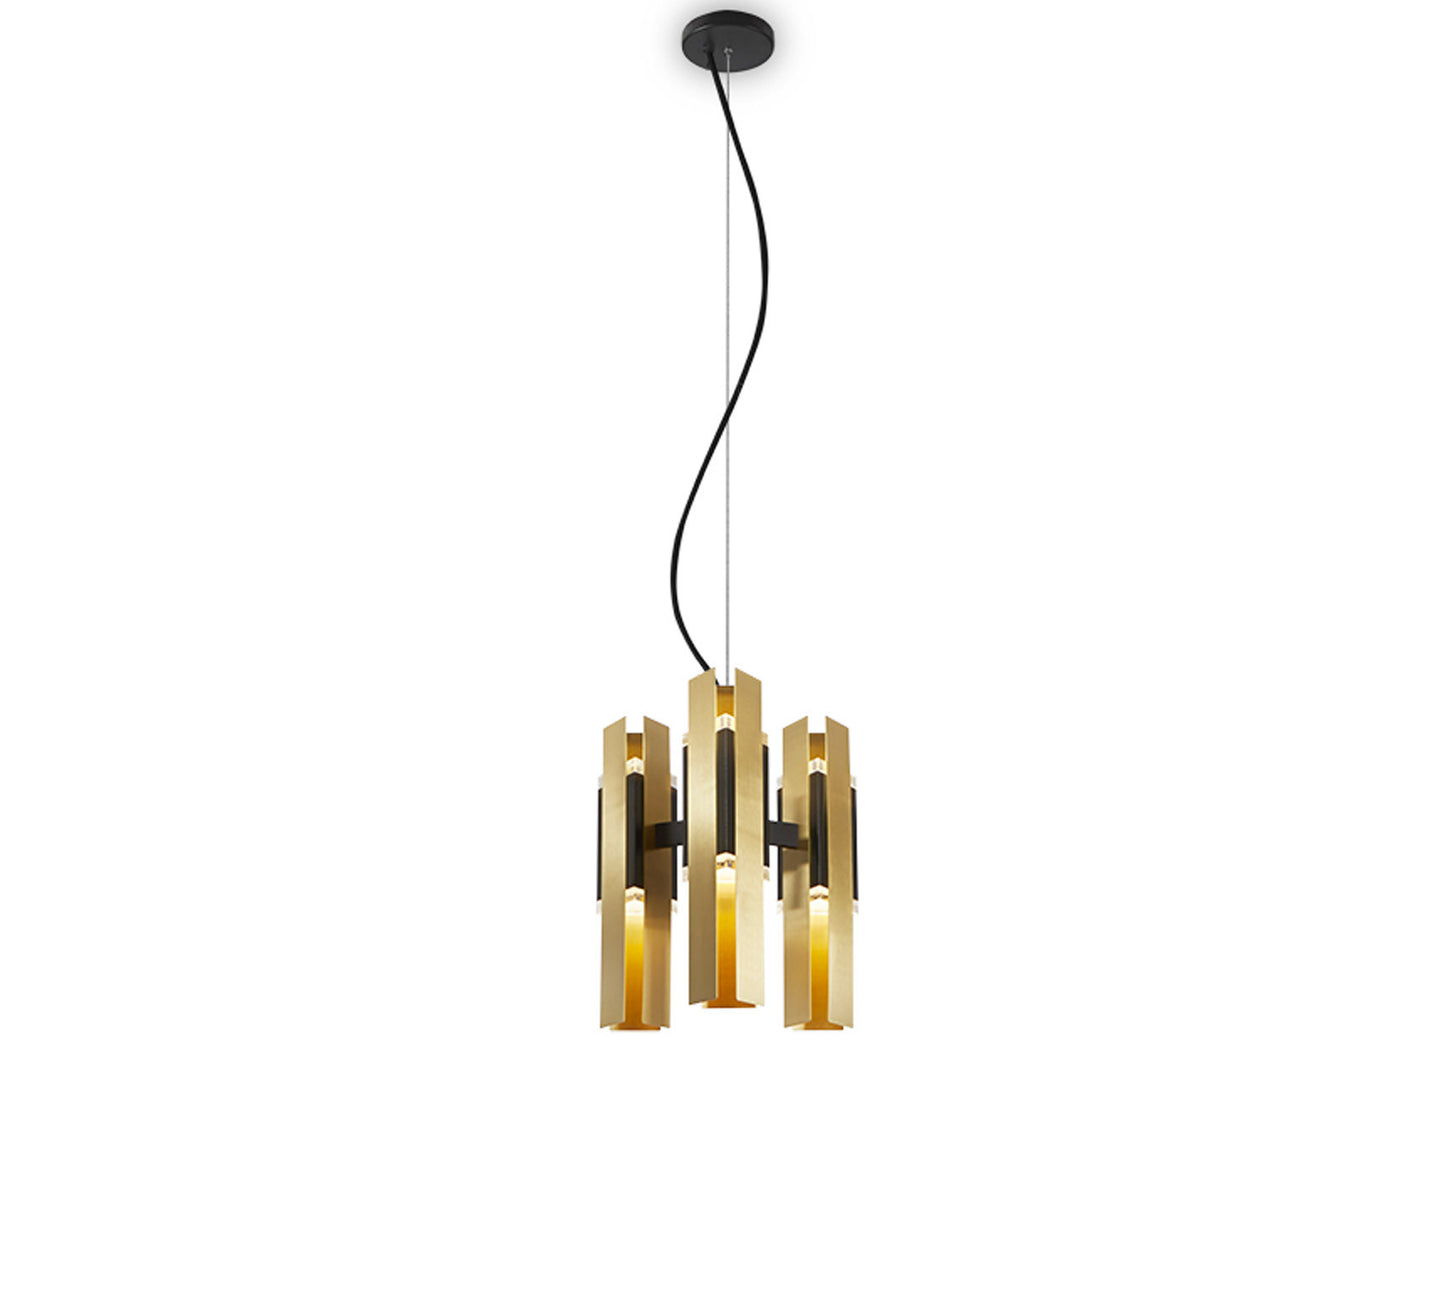 EXVALIBUR CHANDELIER 559.23 BY TOOY $3,300.00